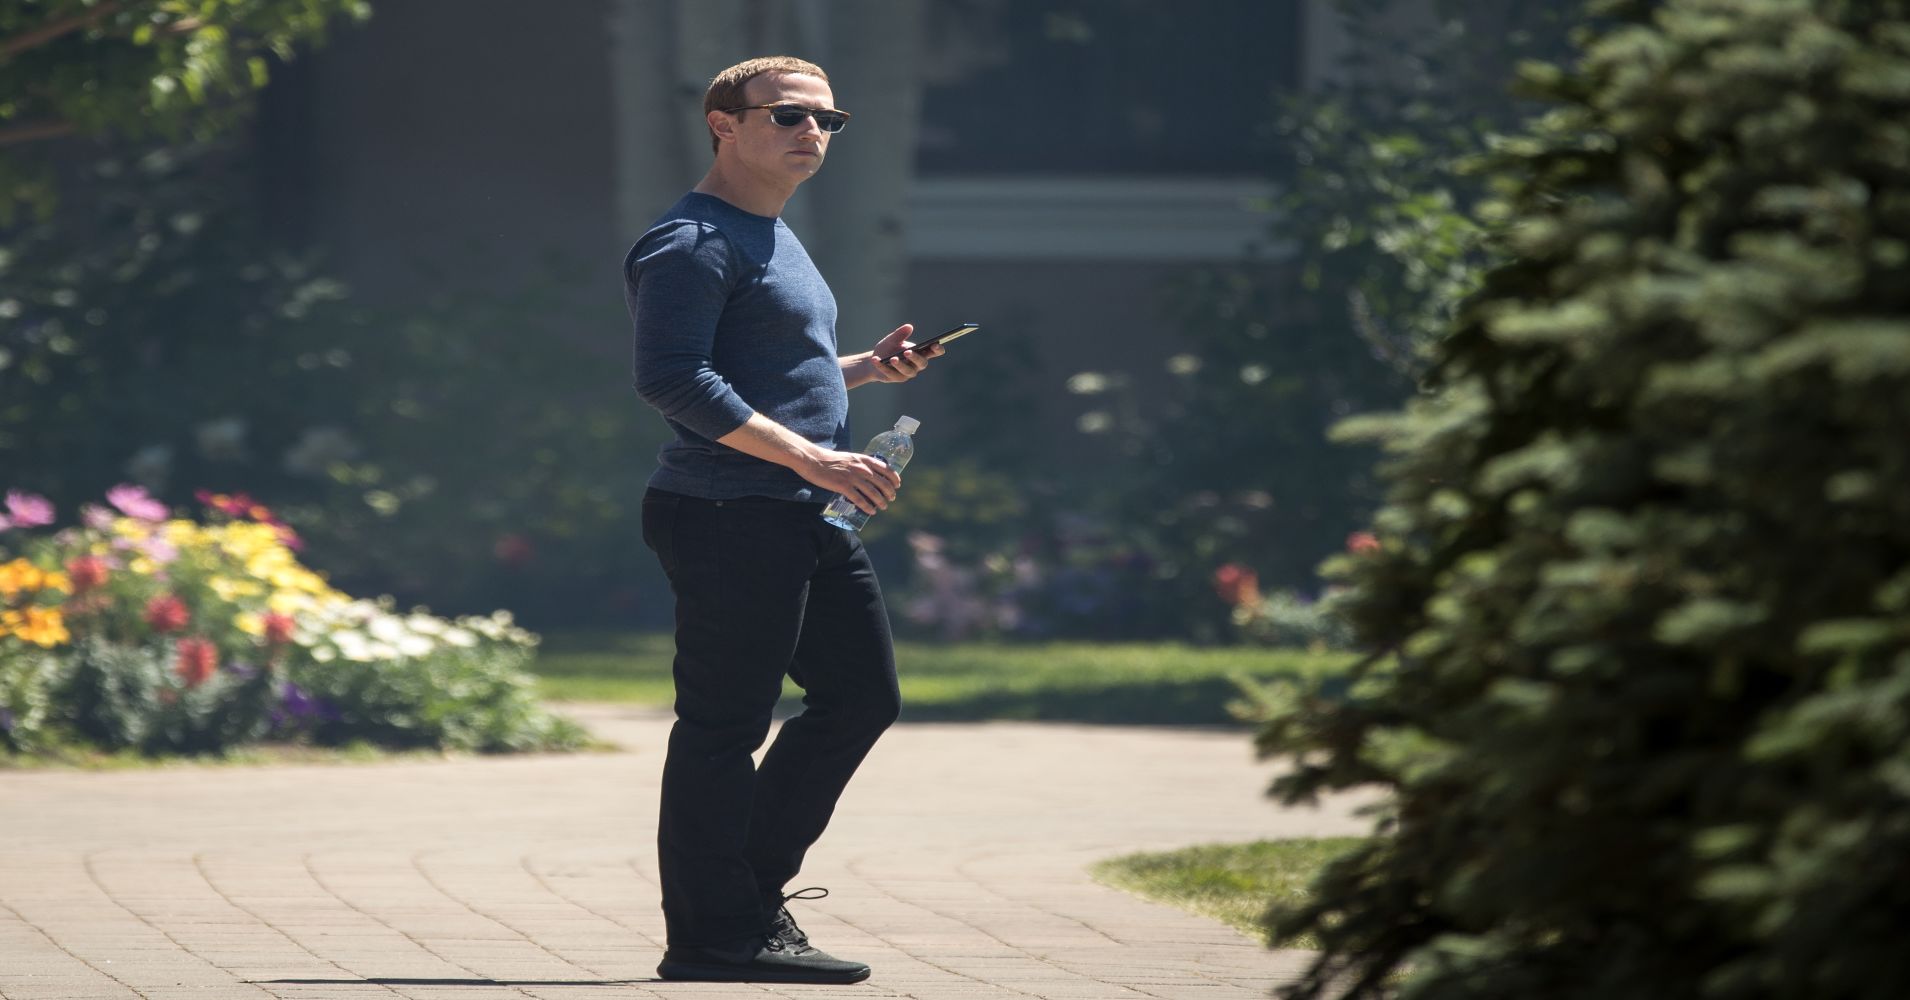 Mark Zuckerberg, chief executive officer of Facebook, attends the annual Allen & Company Sun Valley Conference, July 13, 2018 in Sun Valley, Idaho.